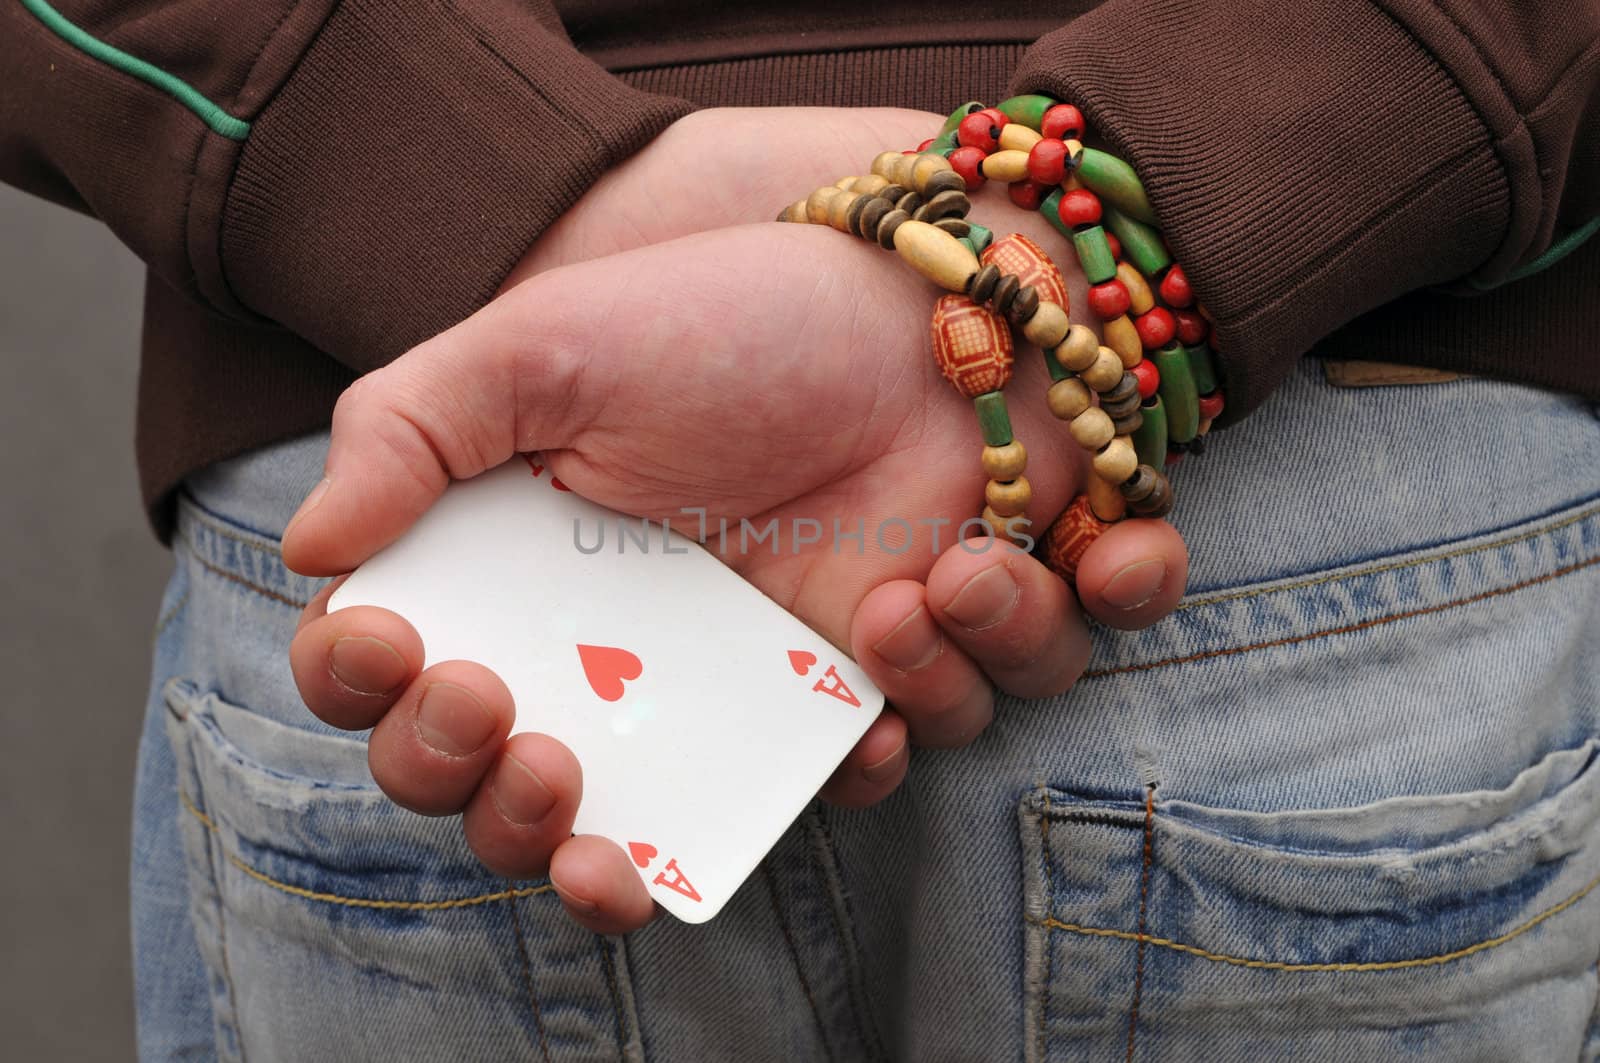 Ace of hearts in hand - hide trump